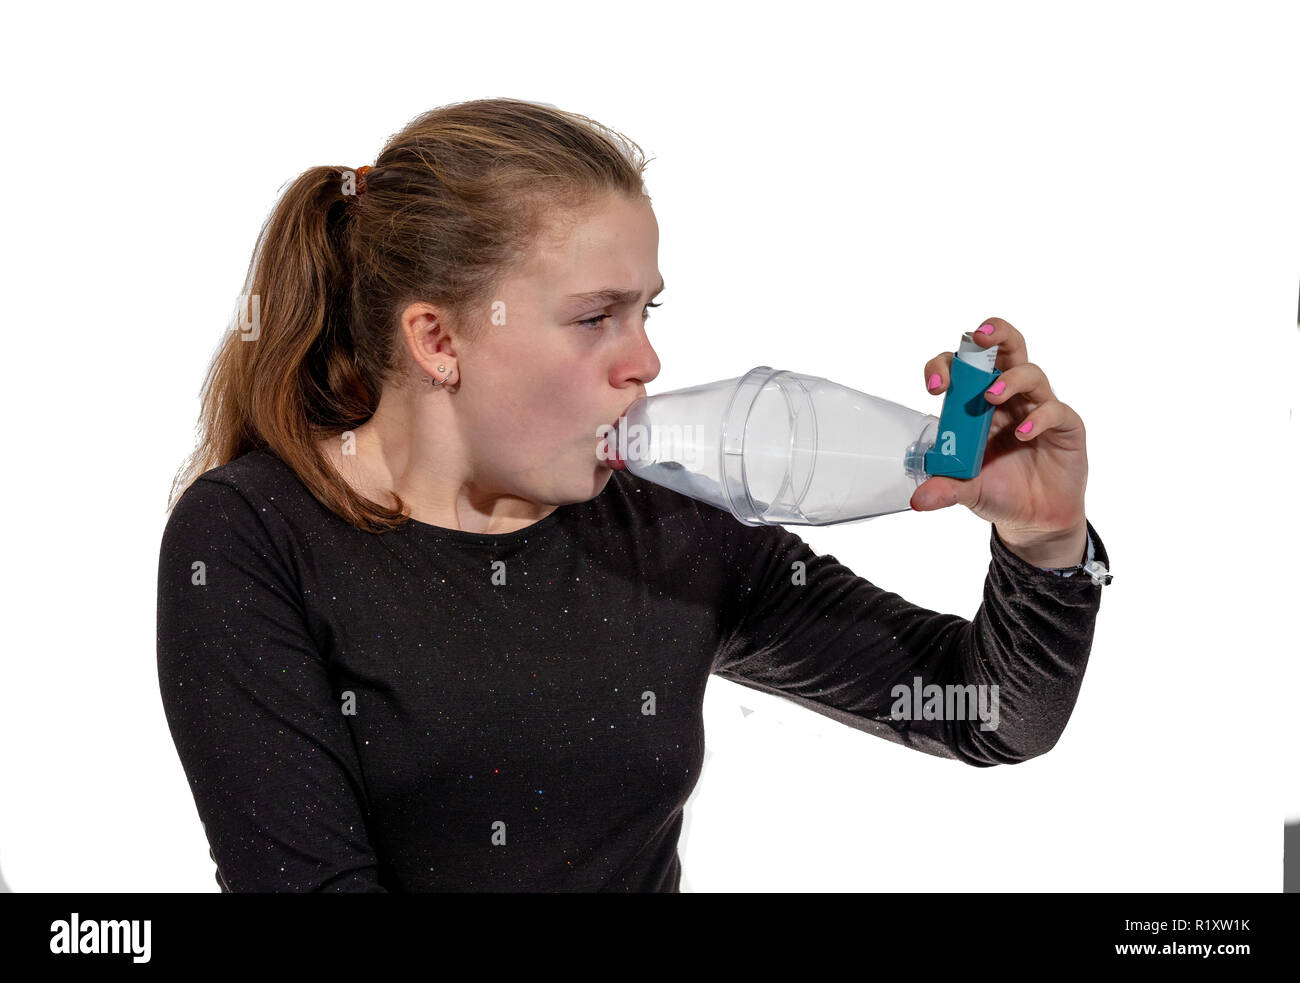 A young girl using an inhaler for asthma Stock Photo